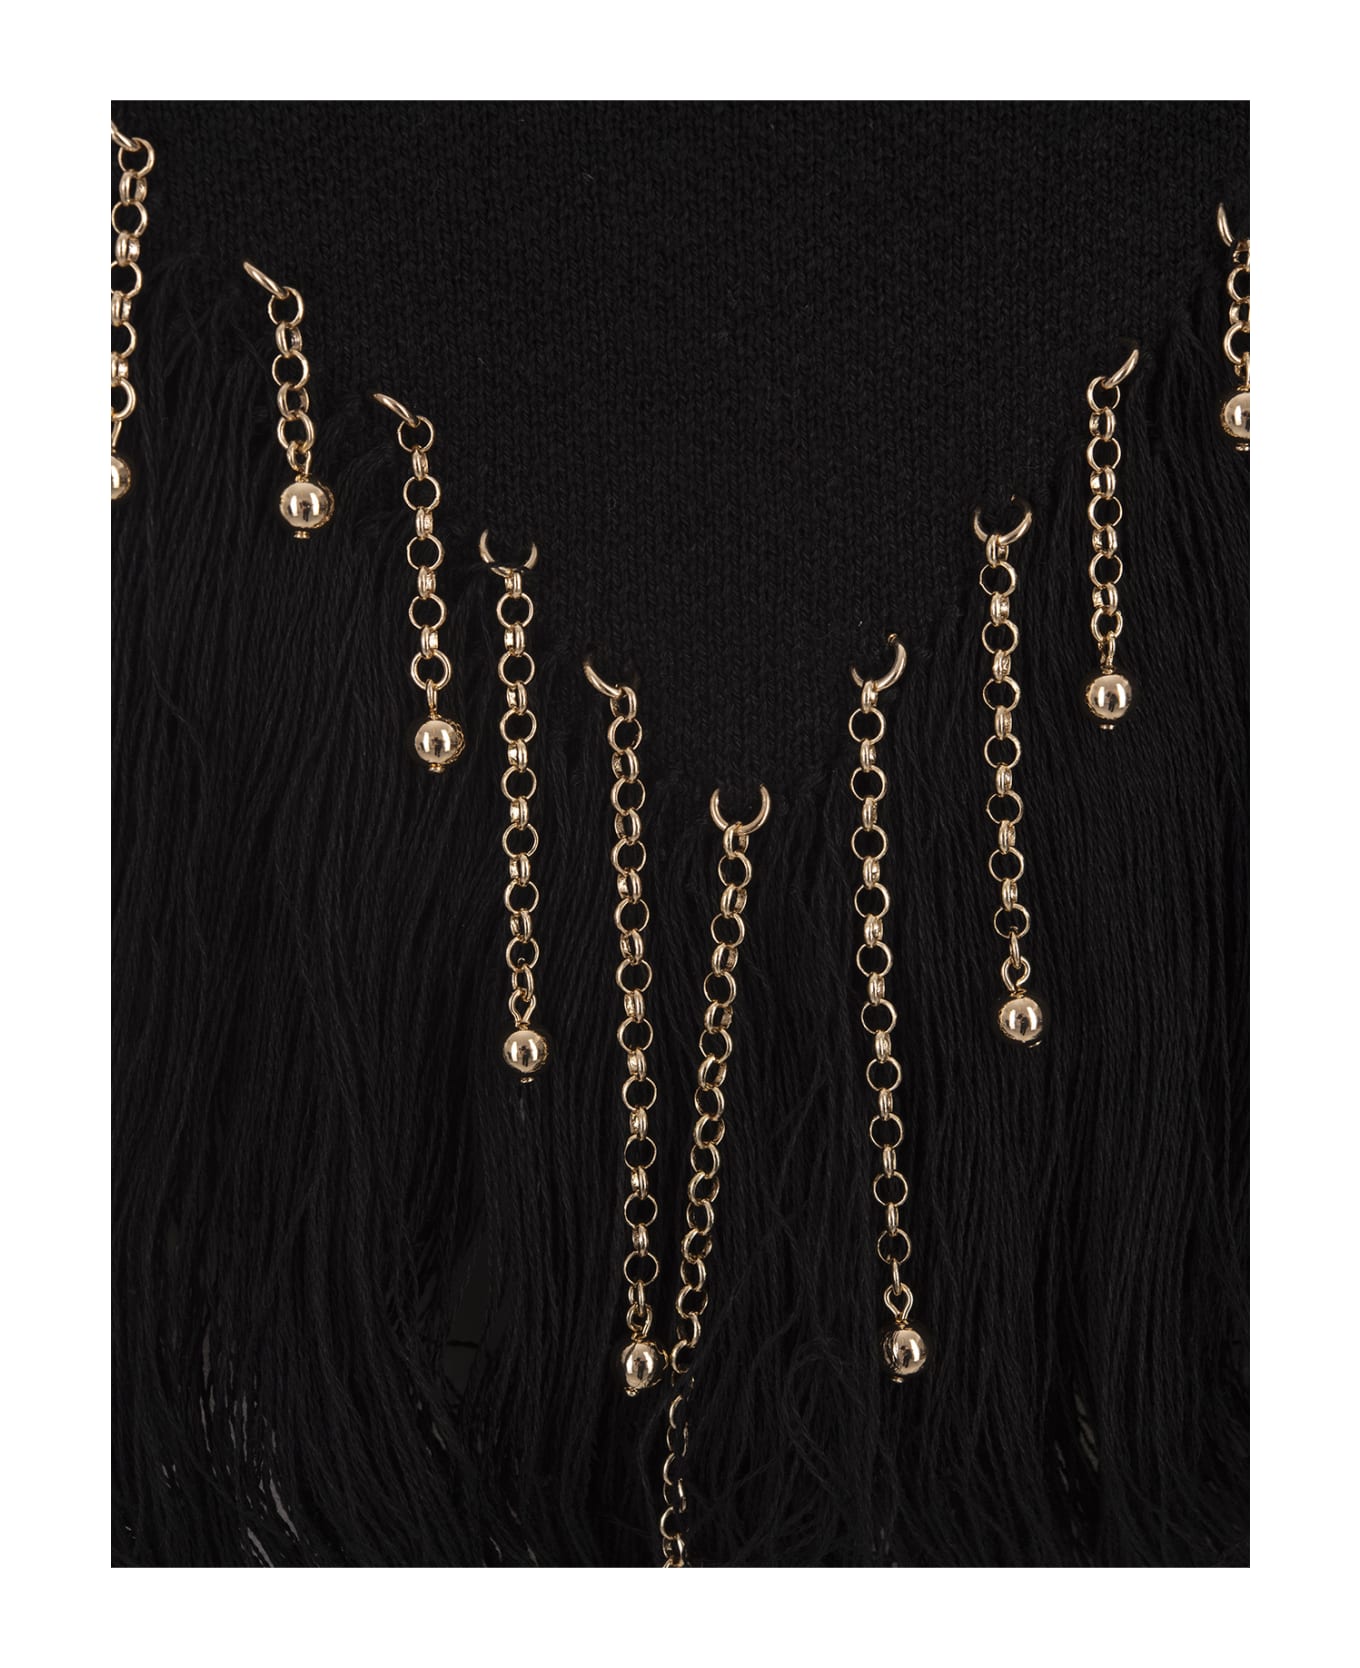 Paco Rabanne Black Woven Top With Knitted Beads And Feathers - Black